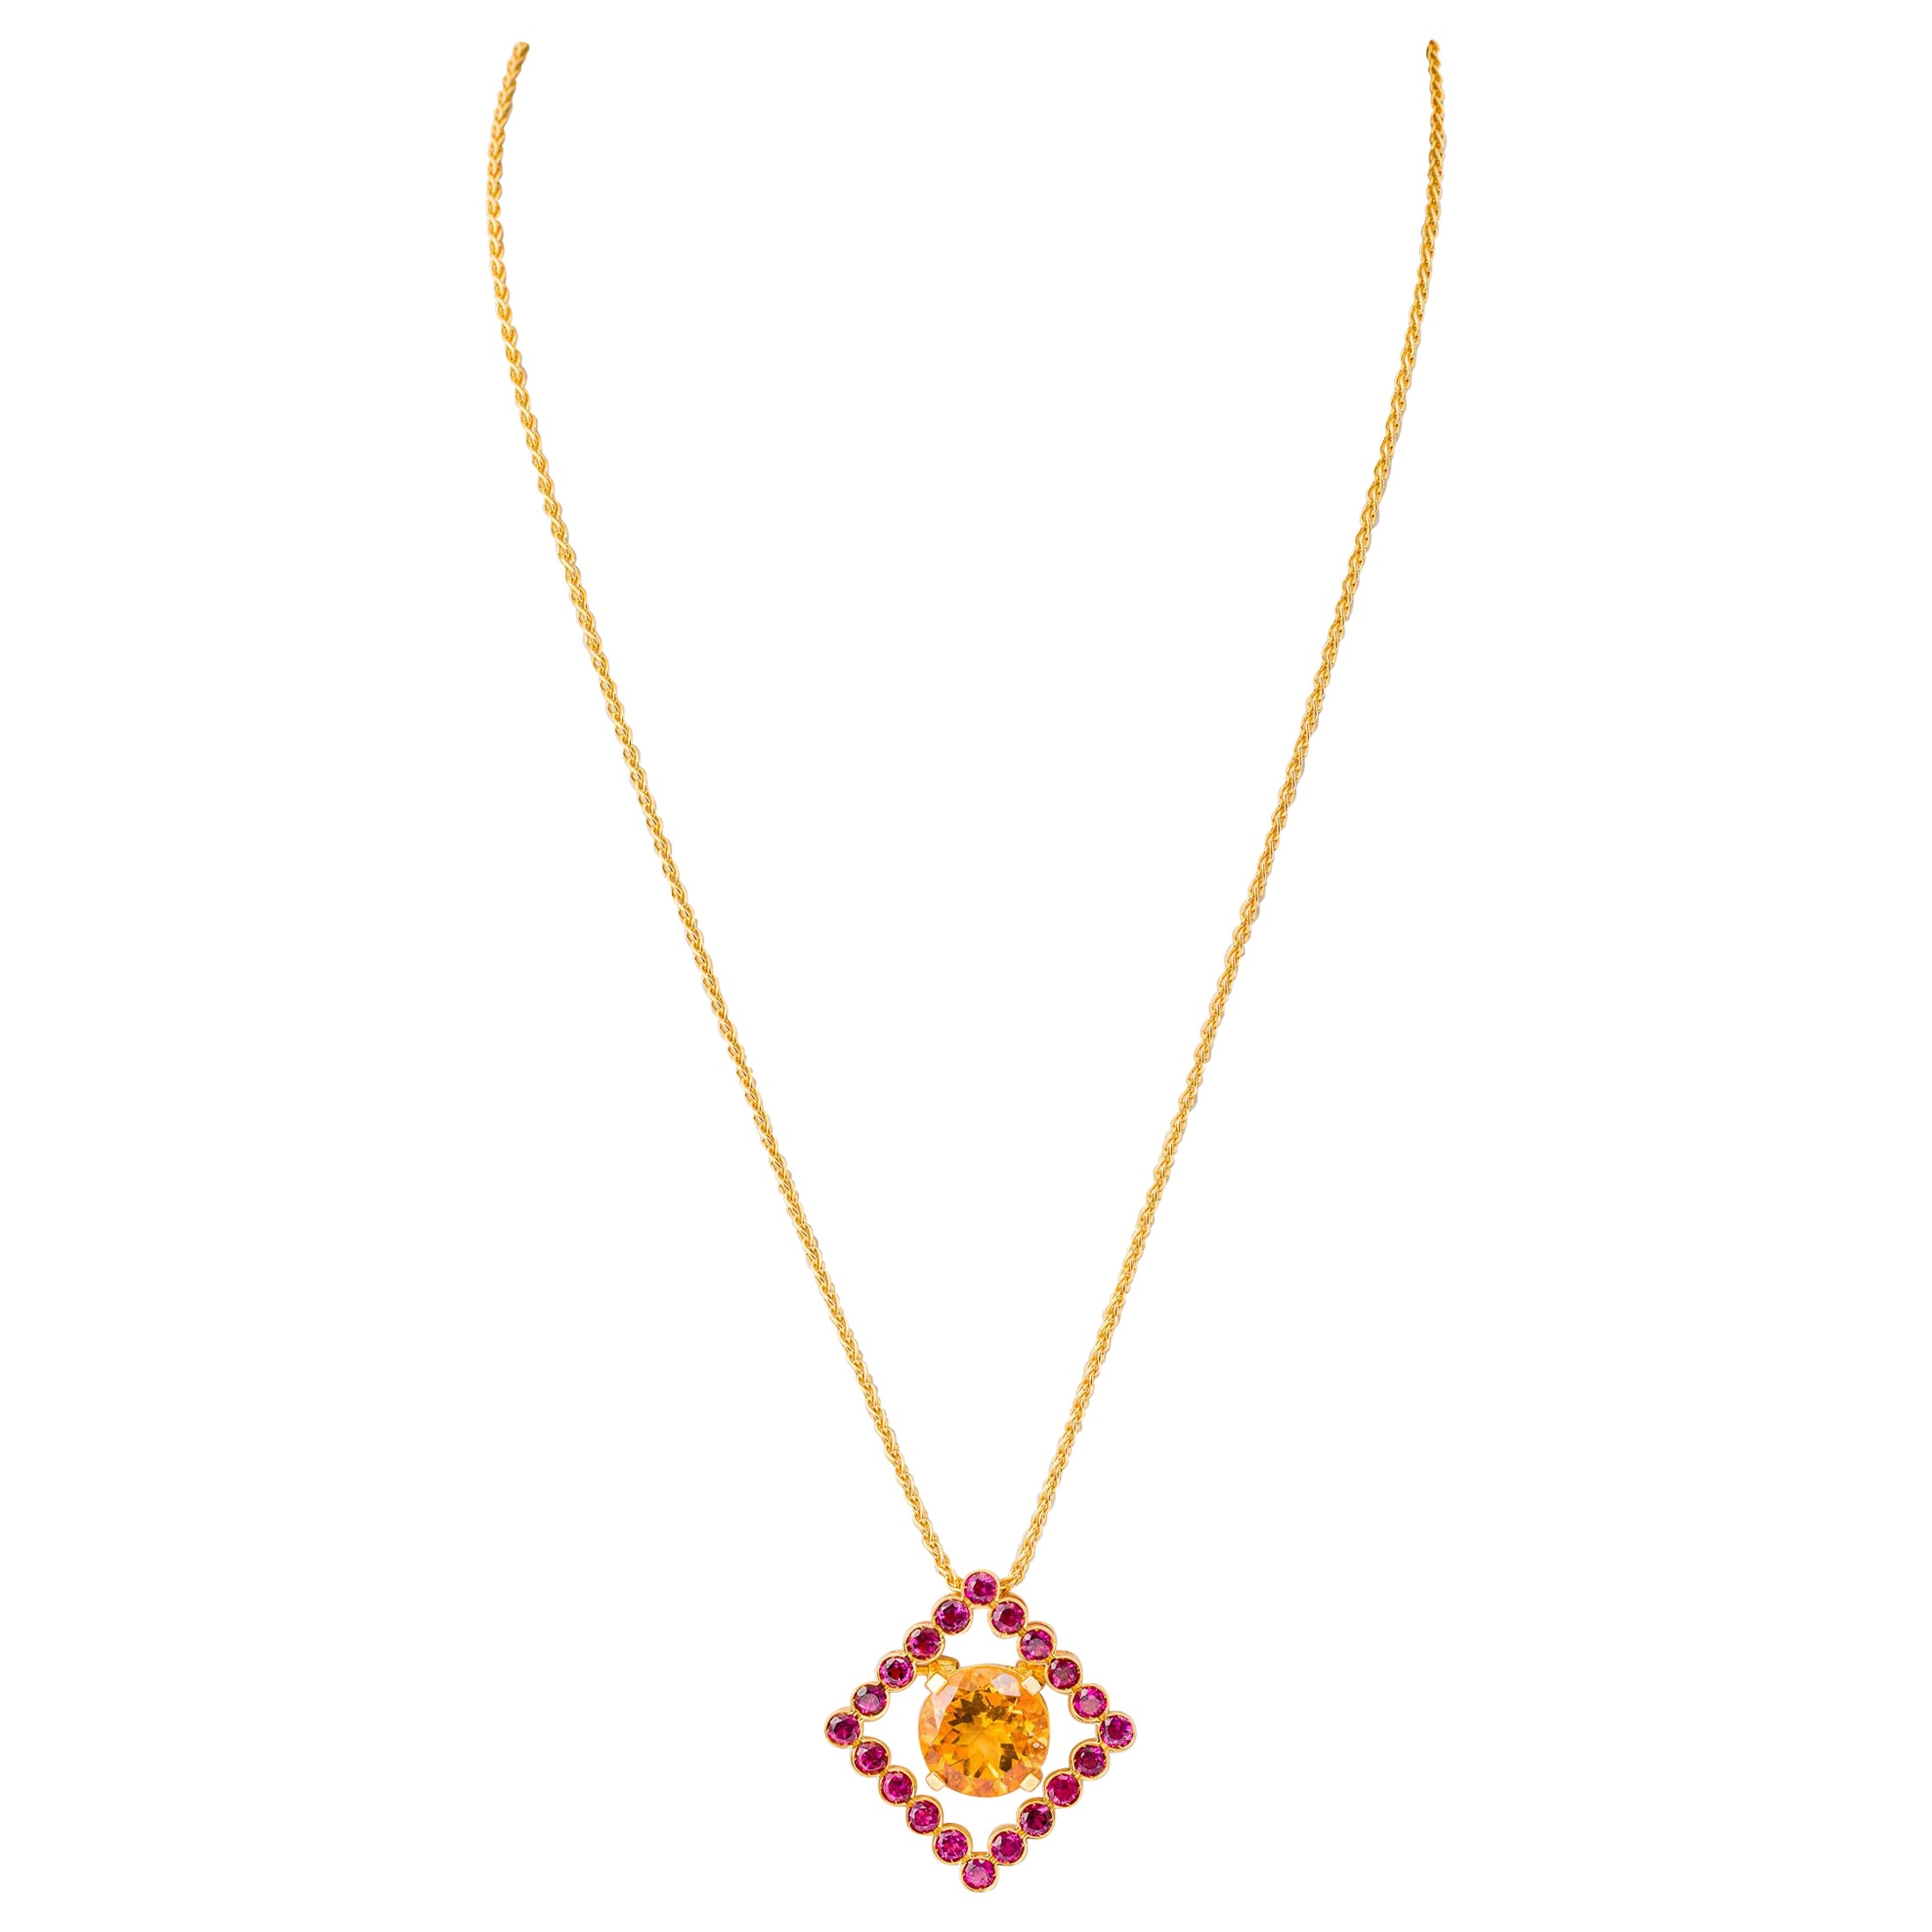 "Costis" Frame In Motion Pendant with 5.37 crts Citrine and Pink Tourmalines